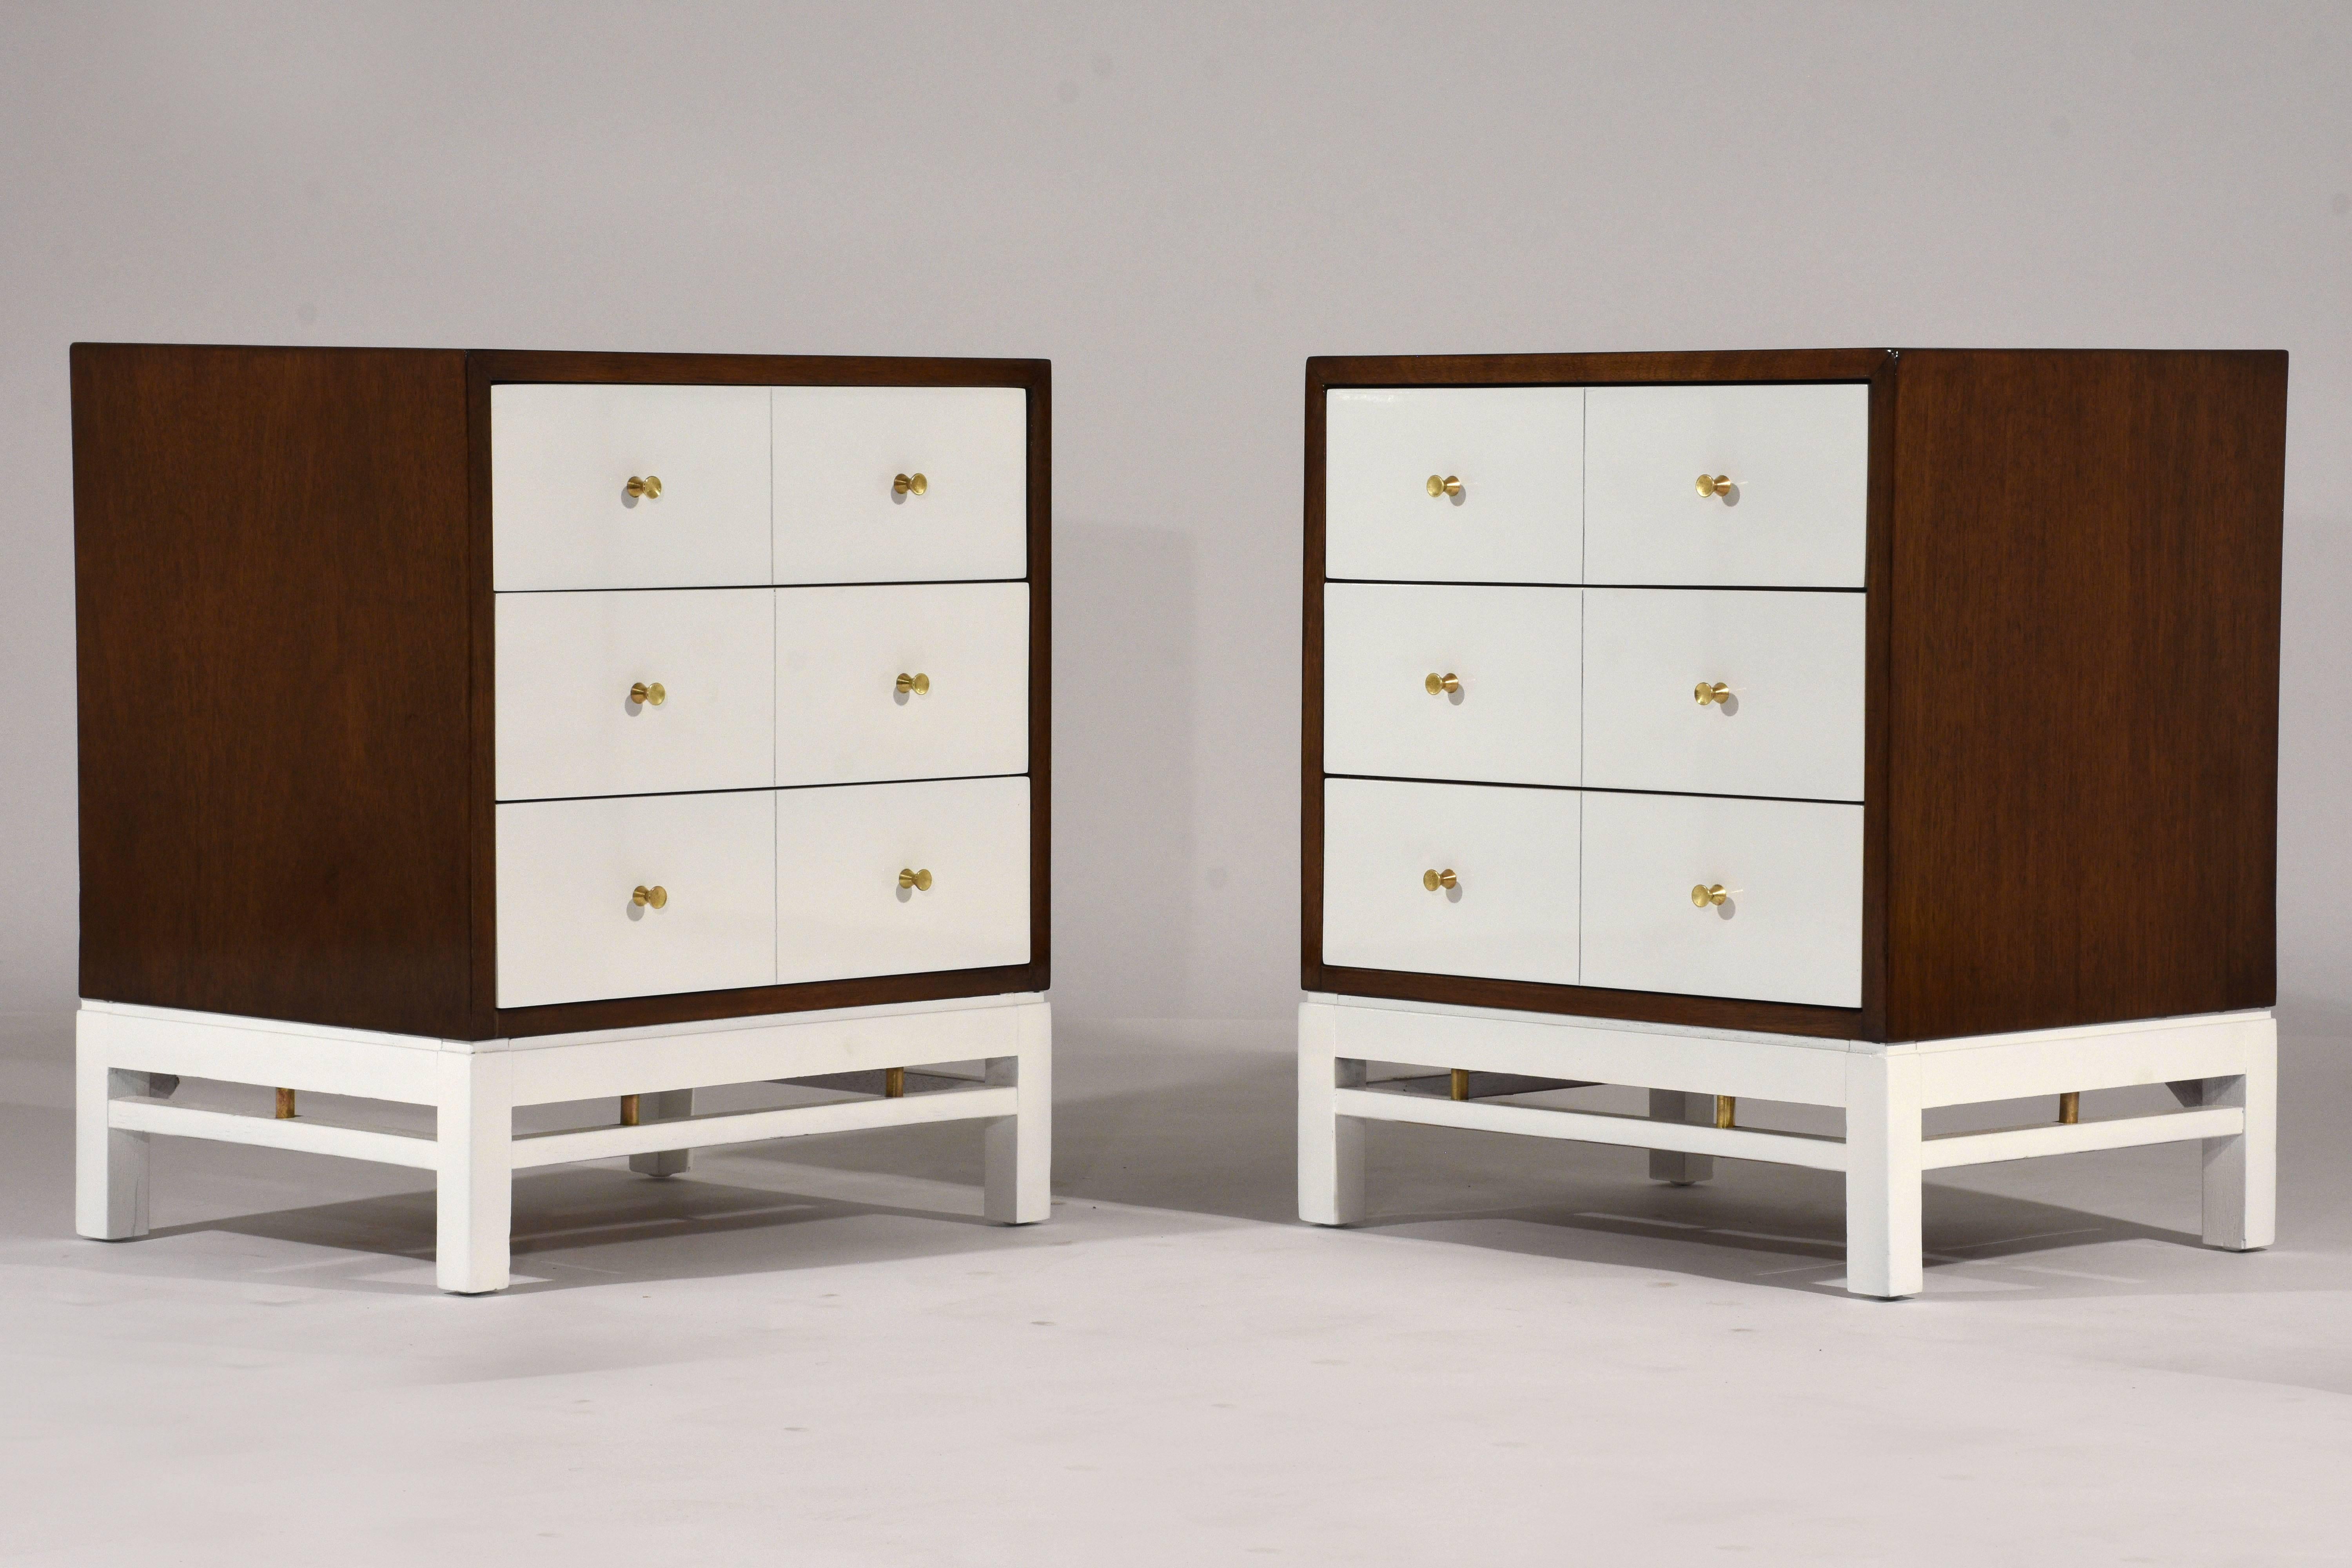 This pair of 1950s Mid-Century Modern-style side tables or nightstands are designed by Paul McCobb. The outside of the night stands are finished in a rich walnut color stain and the facade of the drawers and the base are finished in an off-white